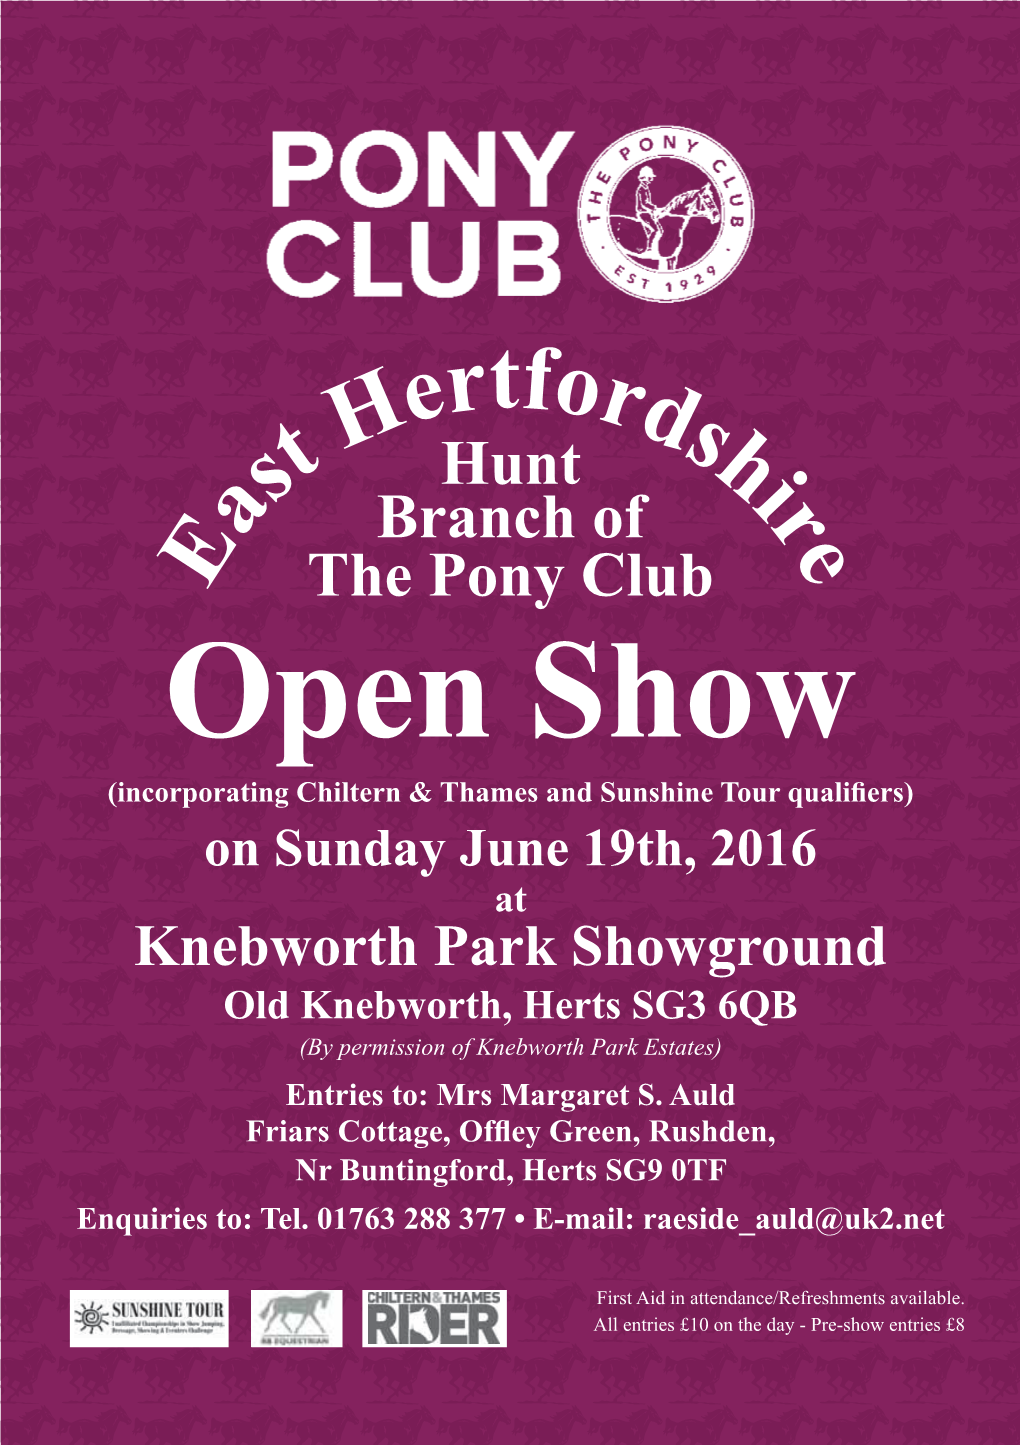 East Hertfordshire Hunt Branch of the Pony Club Open Show